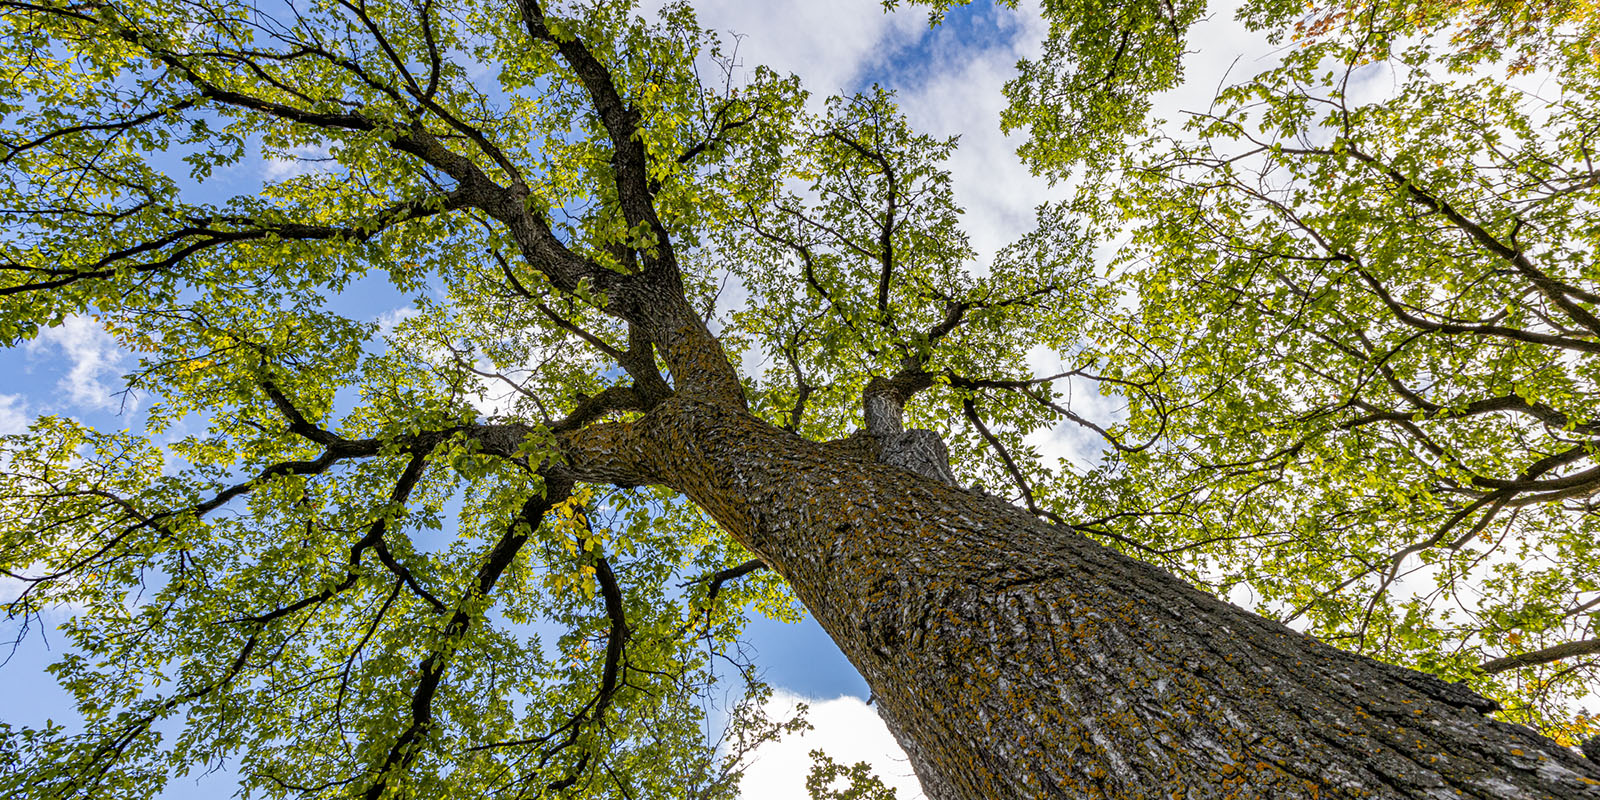 Photo of a large tree - perspective looking up at the branches